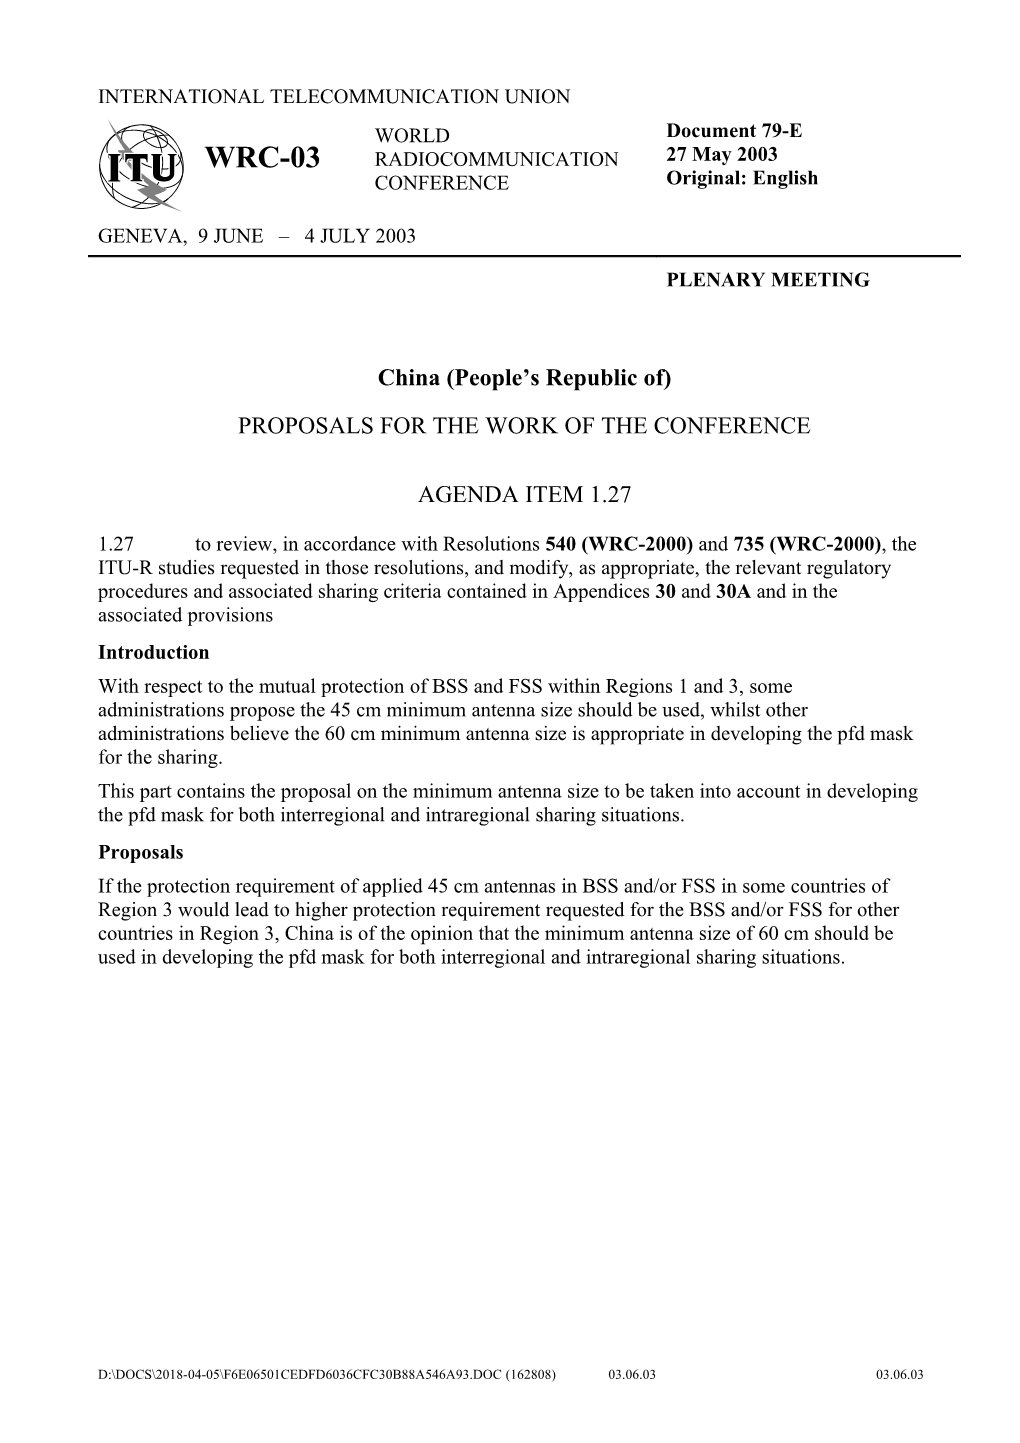 Proposals for the Work of the Conference: Agenda Item 1.27